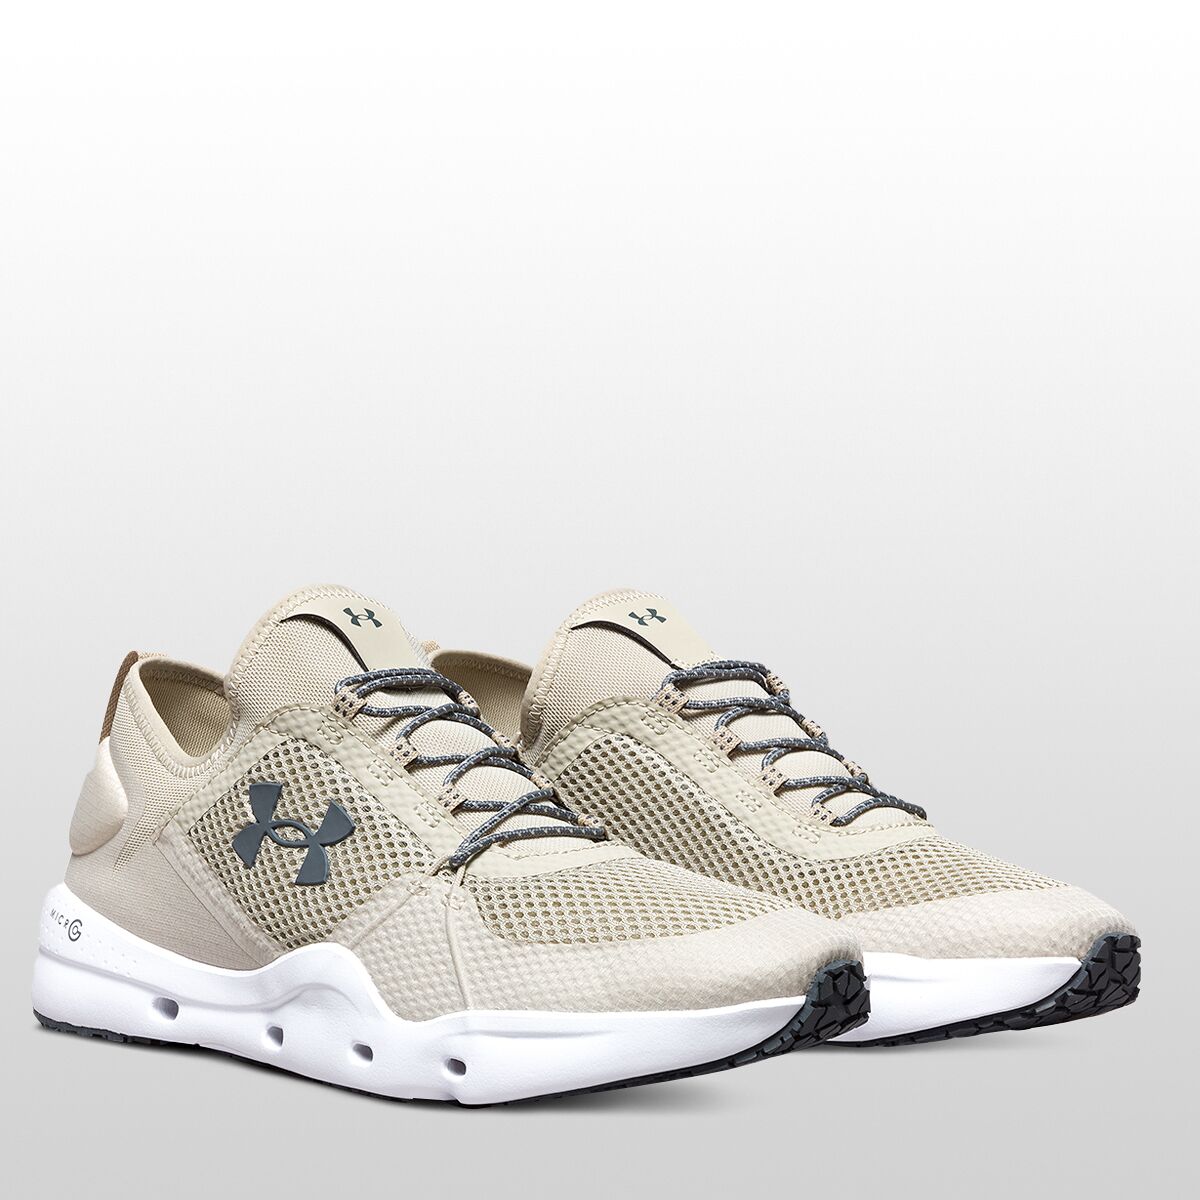 Under Armour Micro G Kilchis Water Shoes for Men